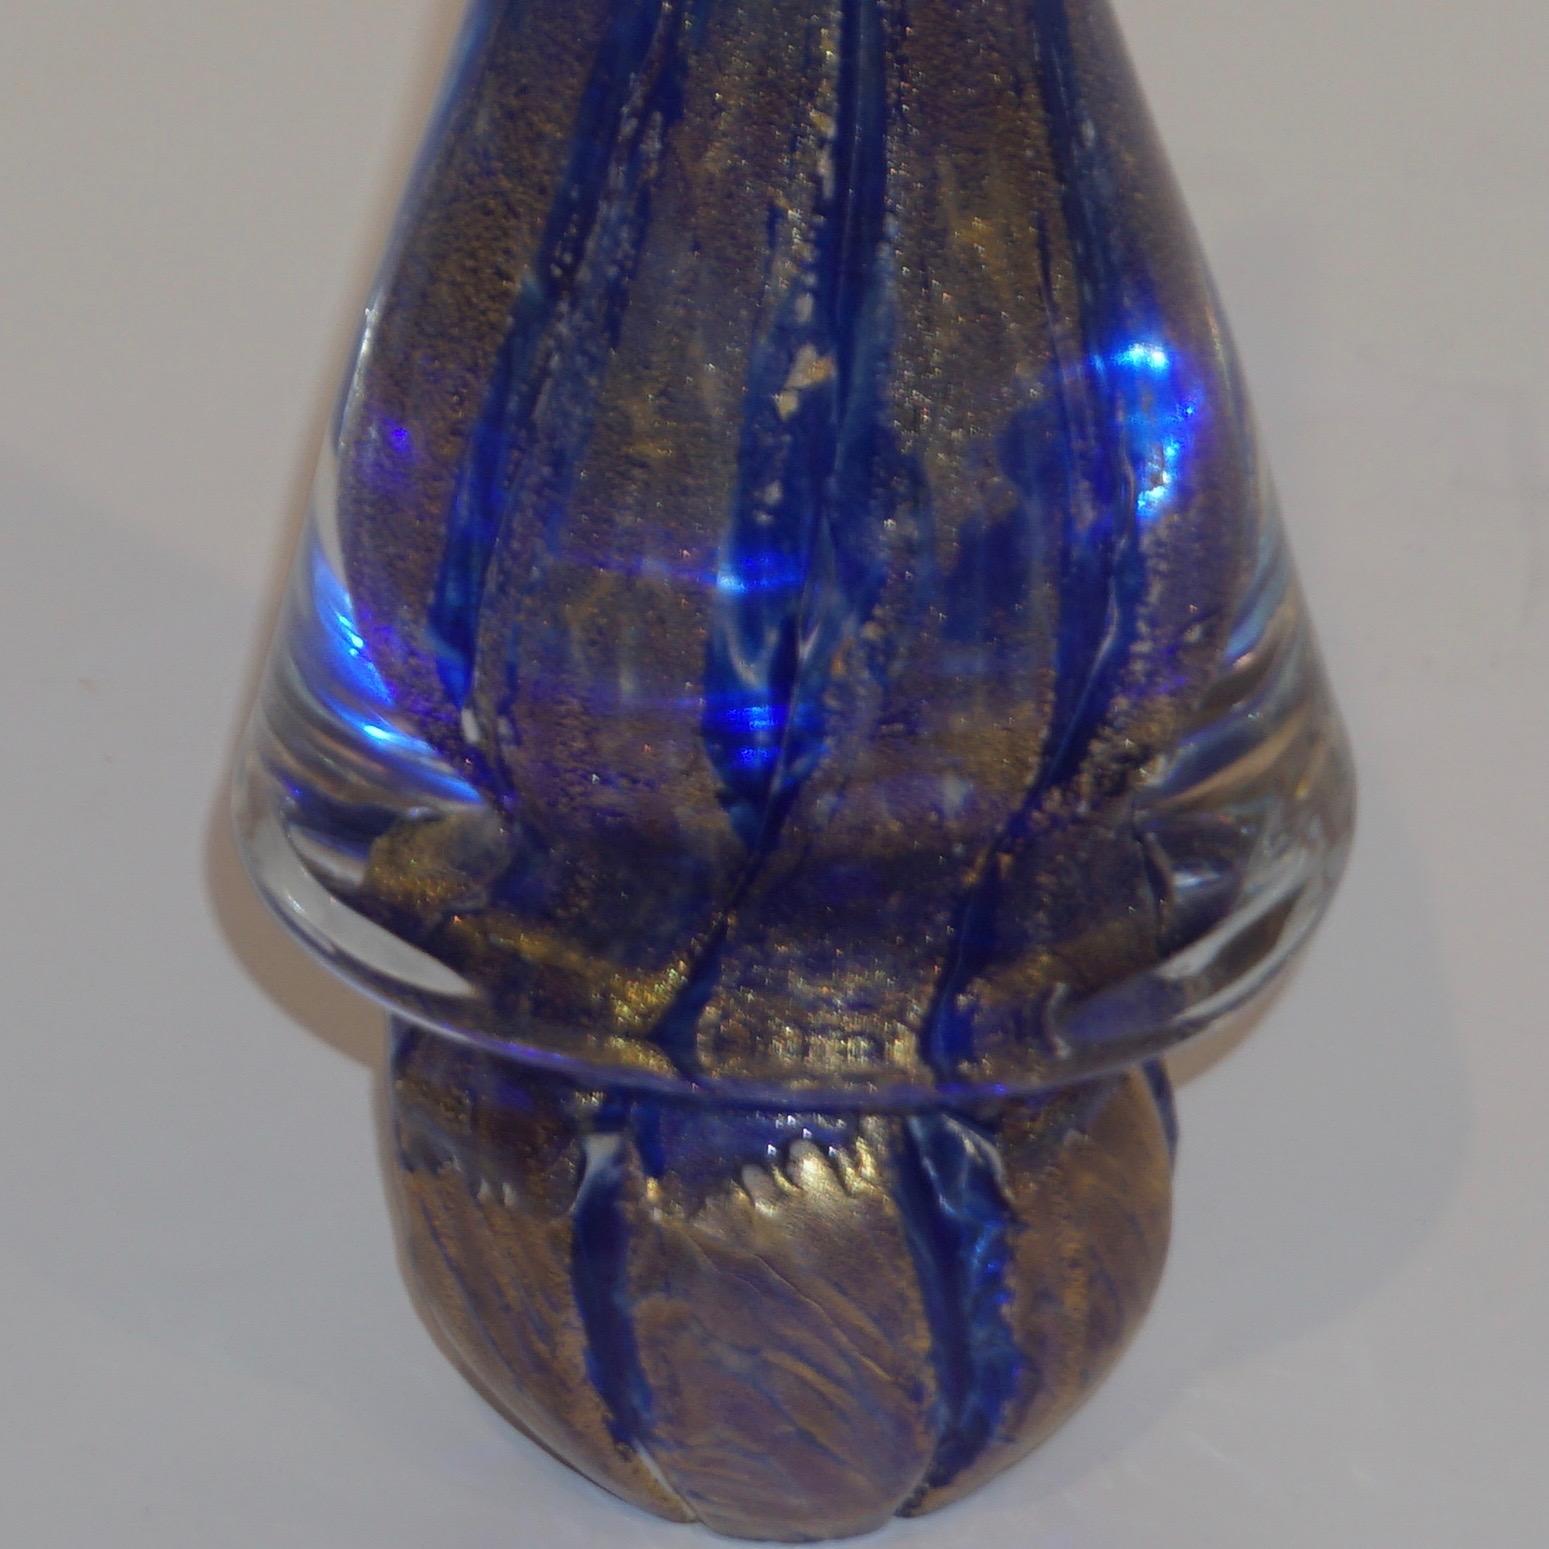 Formia 1980s Italian Vintage Royal Blue and Gold Murano Glass Tree Sculpture 1